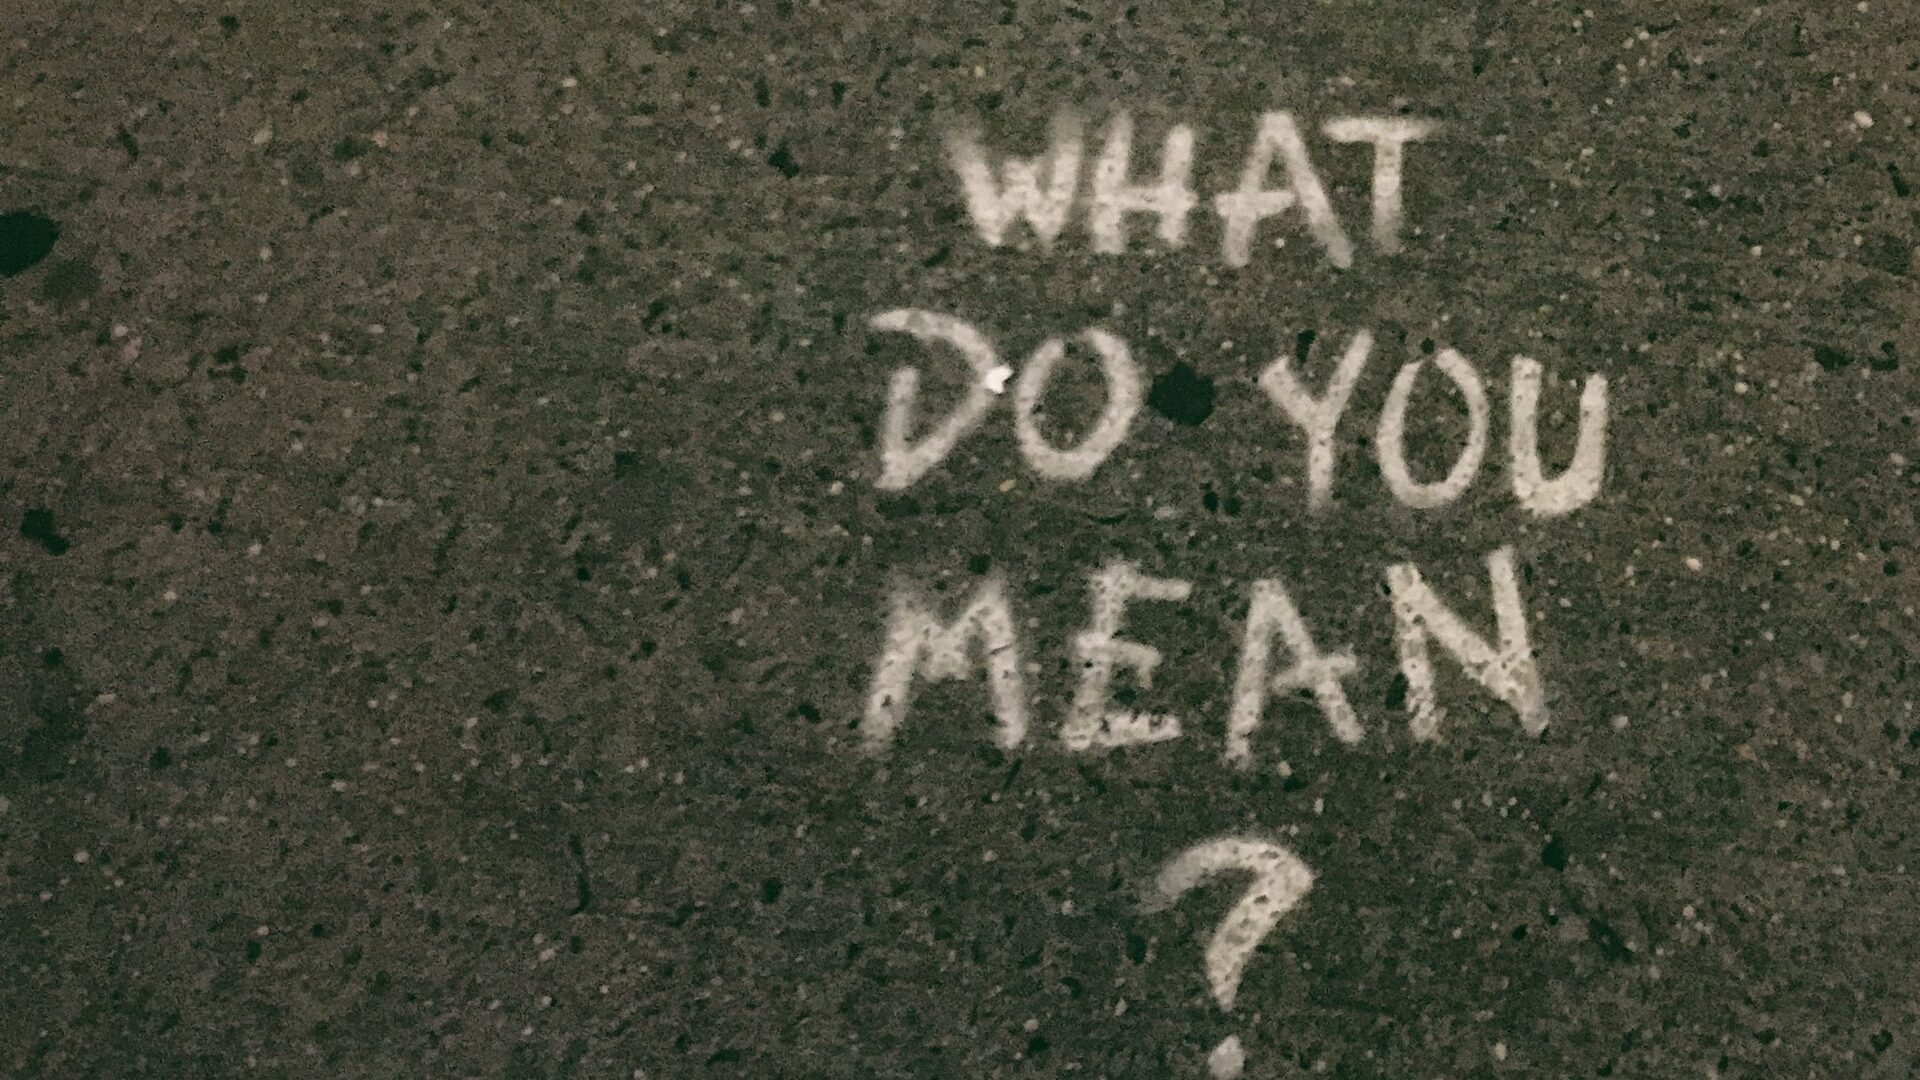 what do you mean??